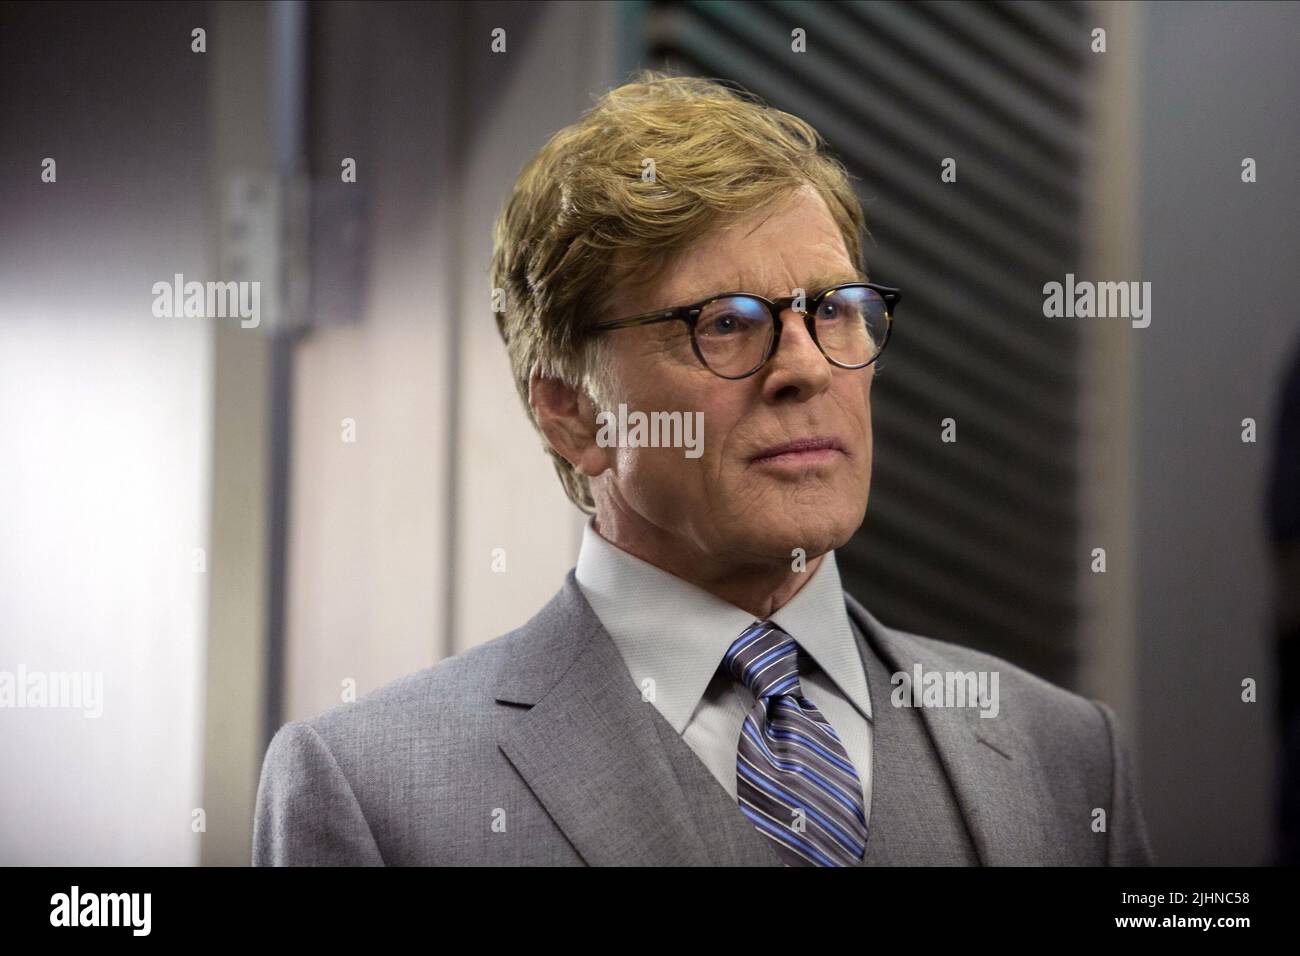 ROBERT REDFORD, CAPTAIN AMERICA: THE WINTER SOLDIER, 2014 Stock Photo